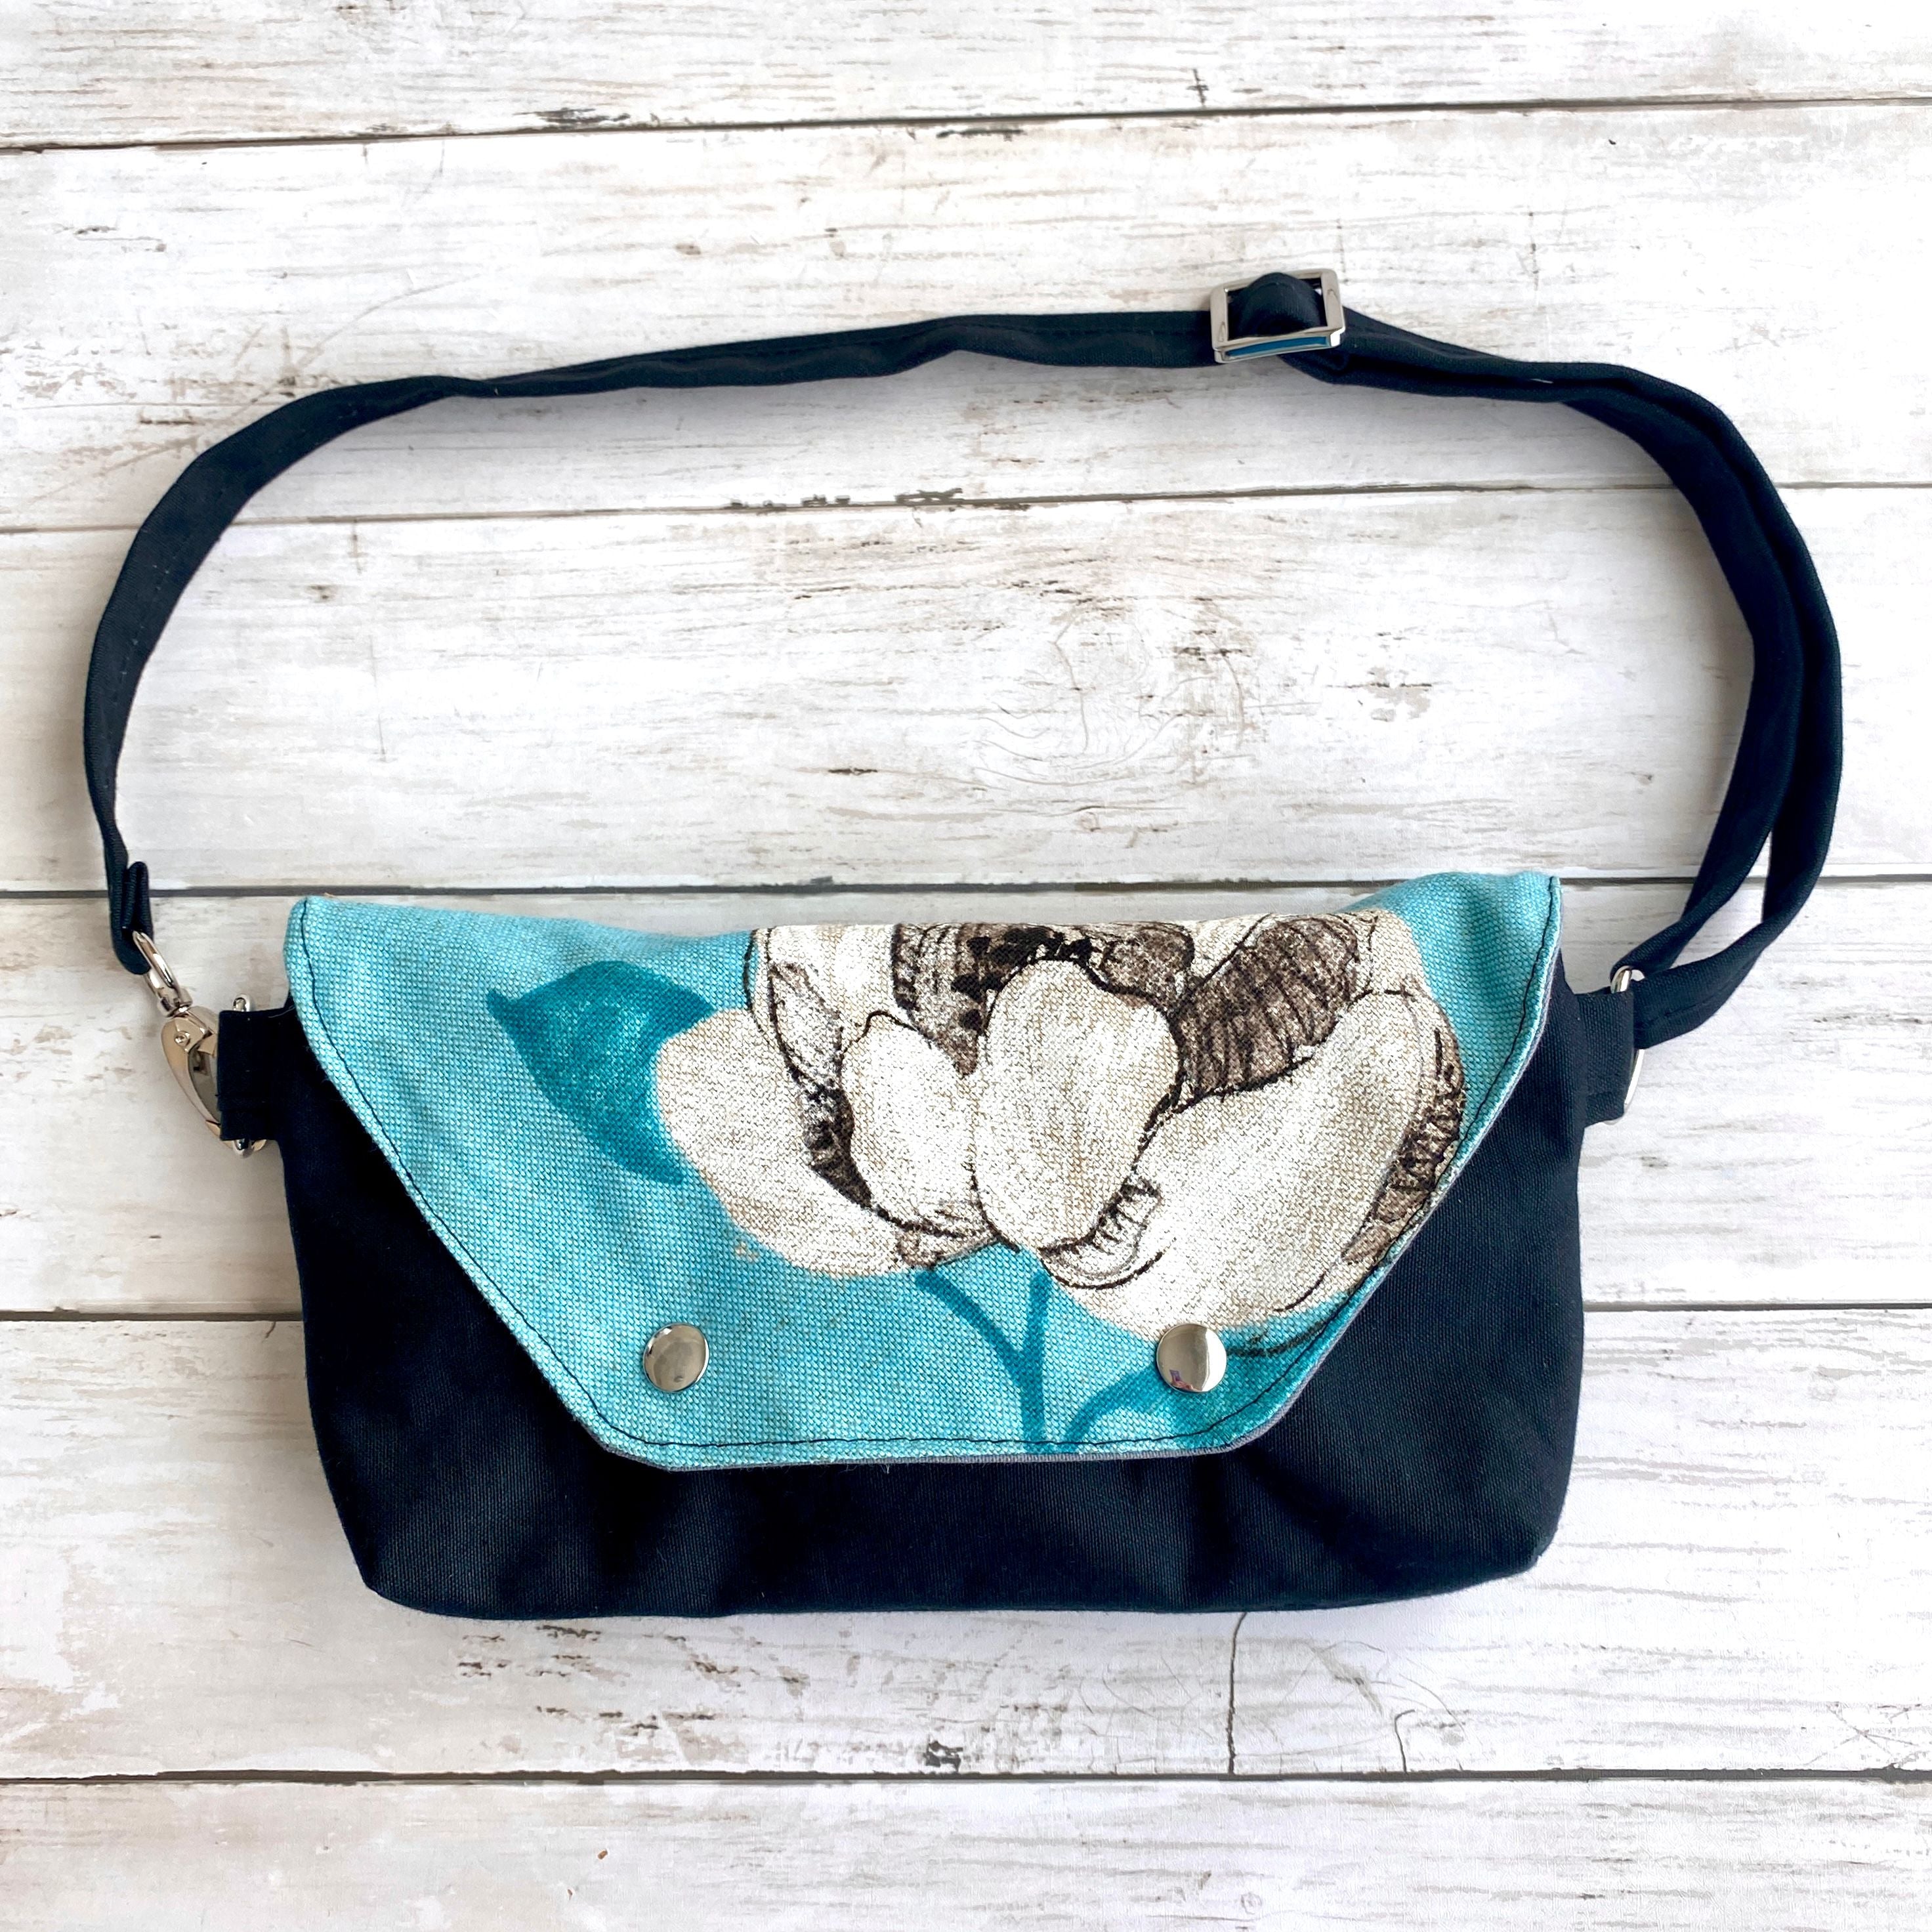 Traveler Fanny Pack in Blue Begonia 1 and Black